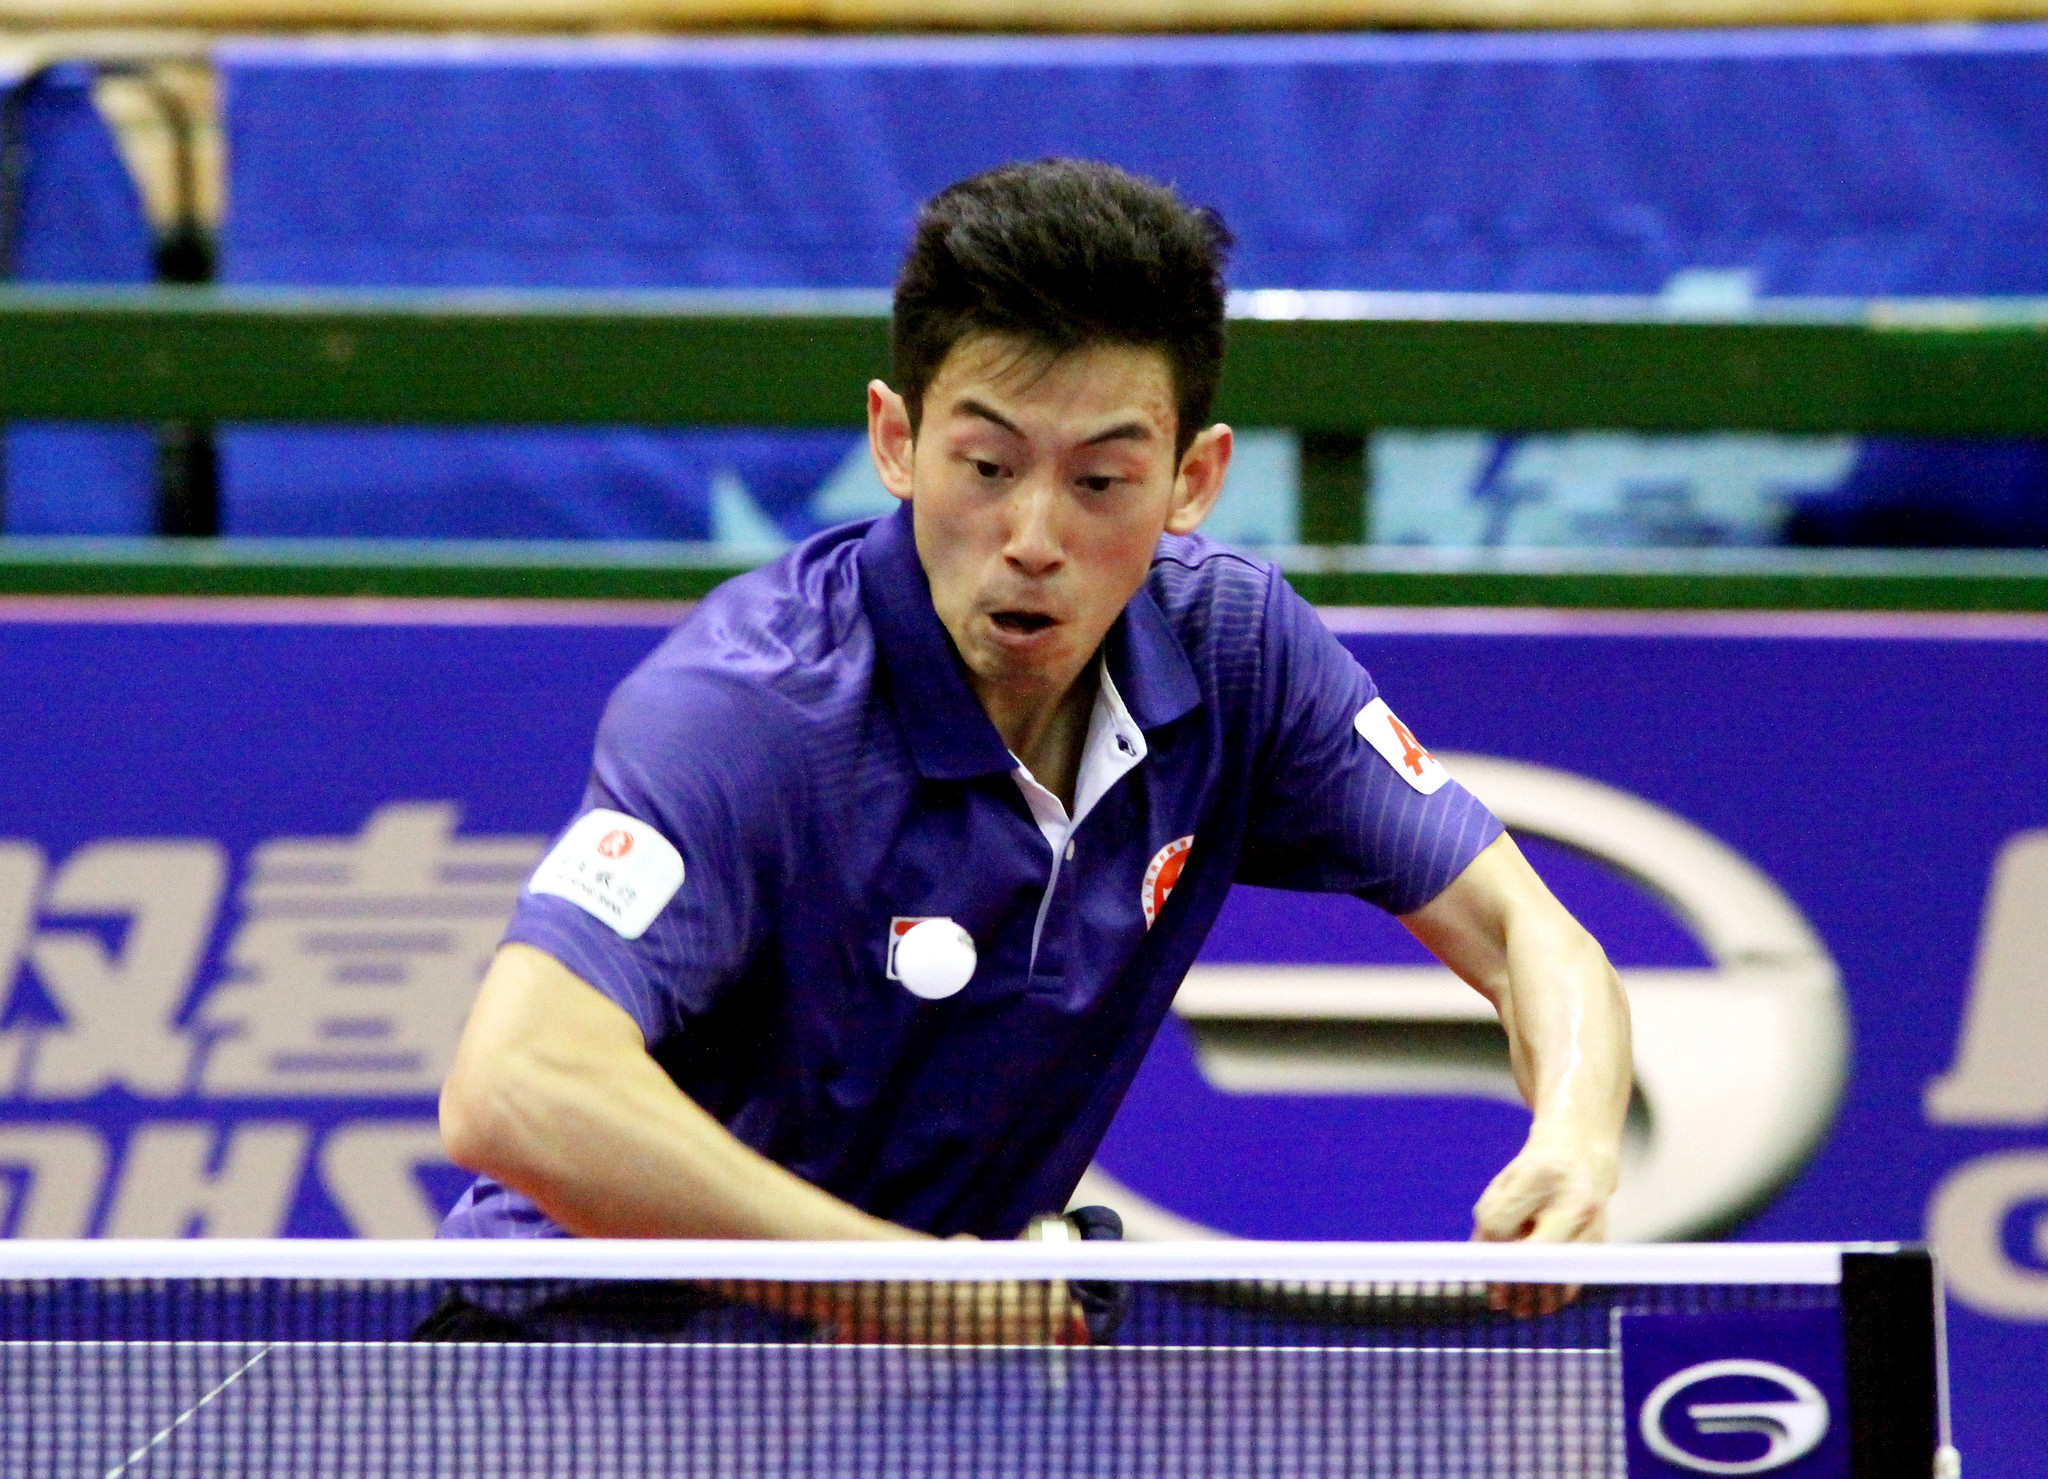 Wong Chun-ting in action in the final. Photo: ITTF  www.flickr.com/photos/ittfworld/20397130414/